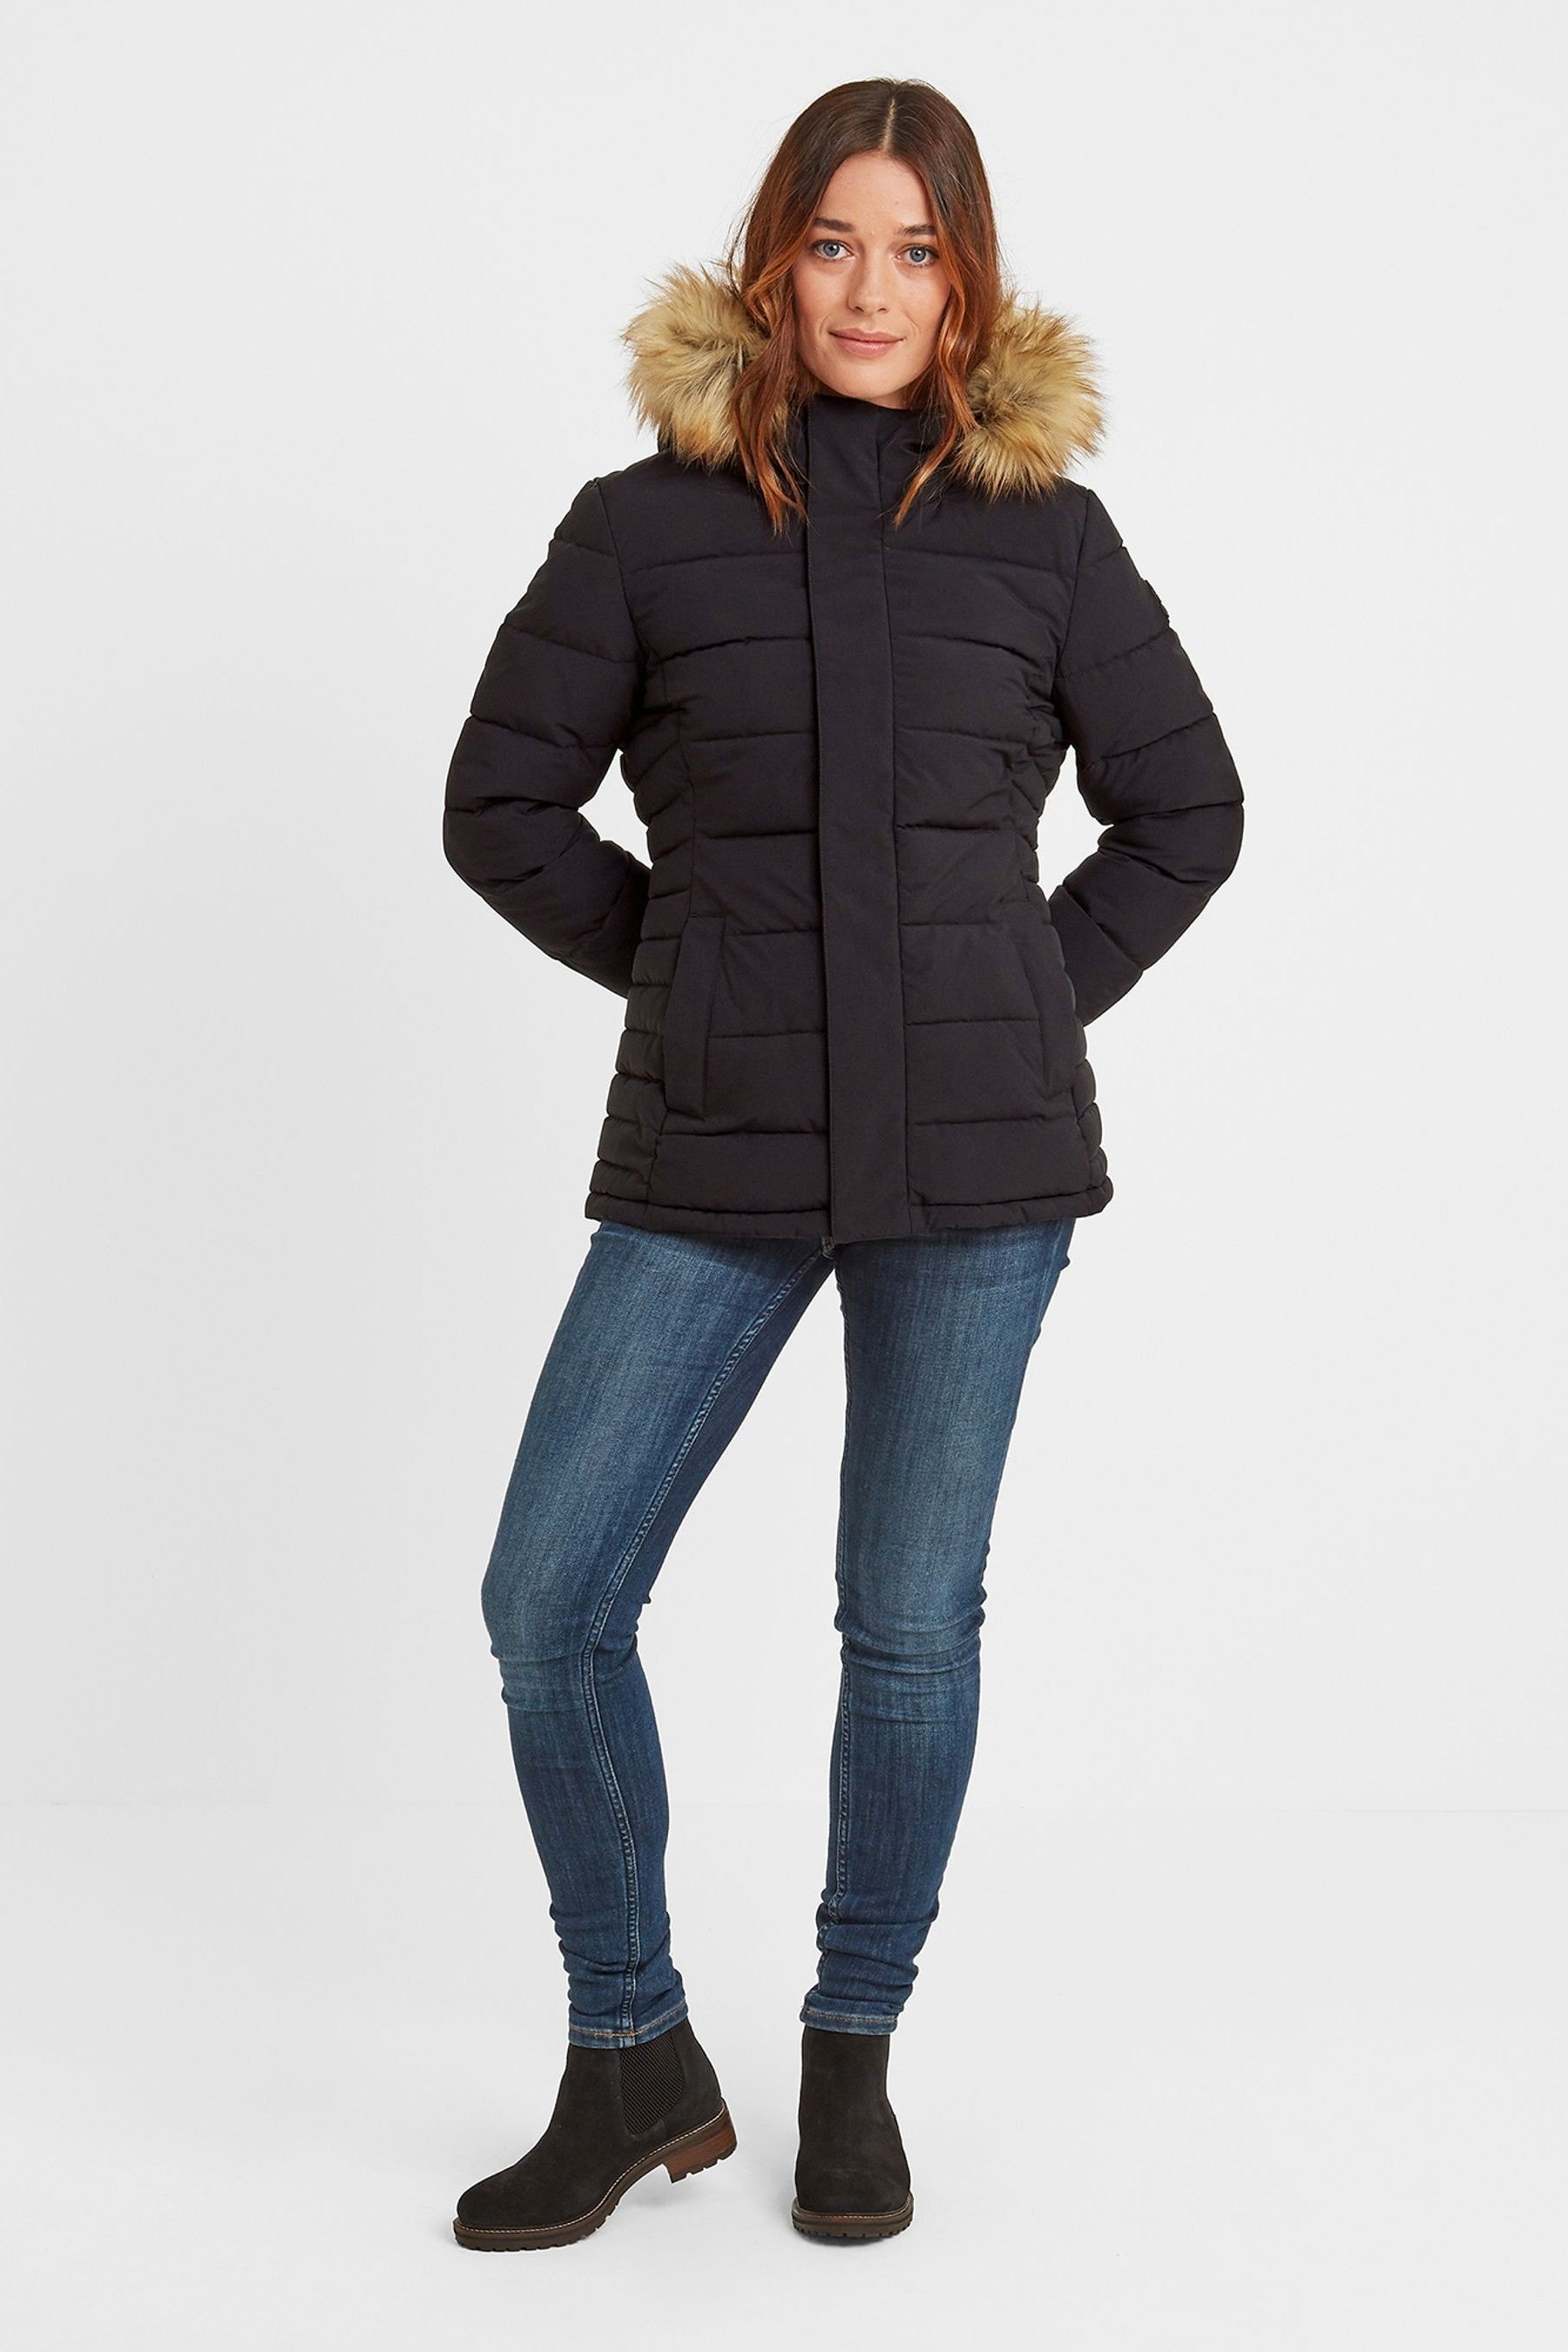 Buy Tog 24 Helwith Womens Insulated Jacket from the Next UK online shop